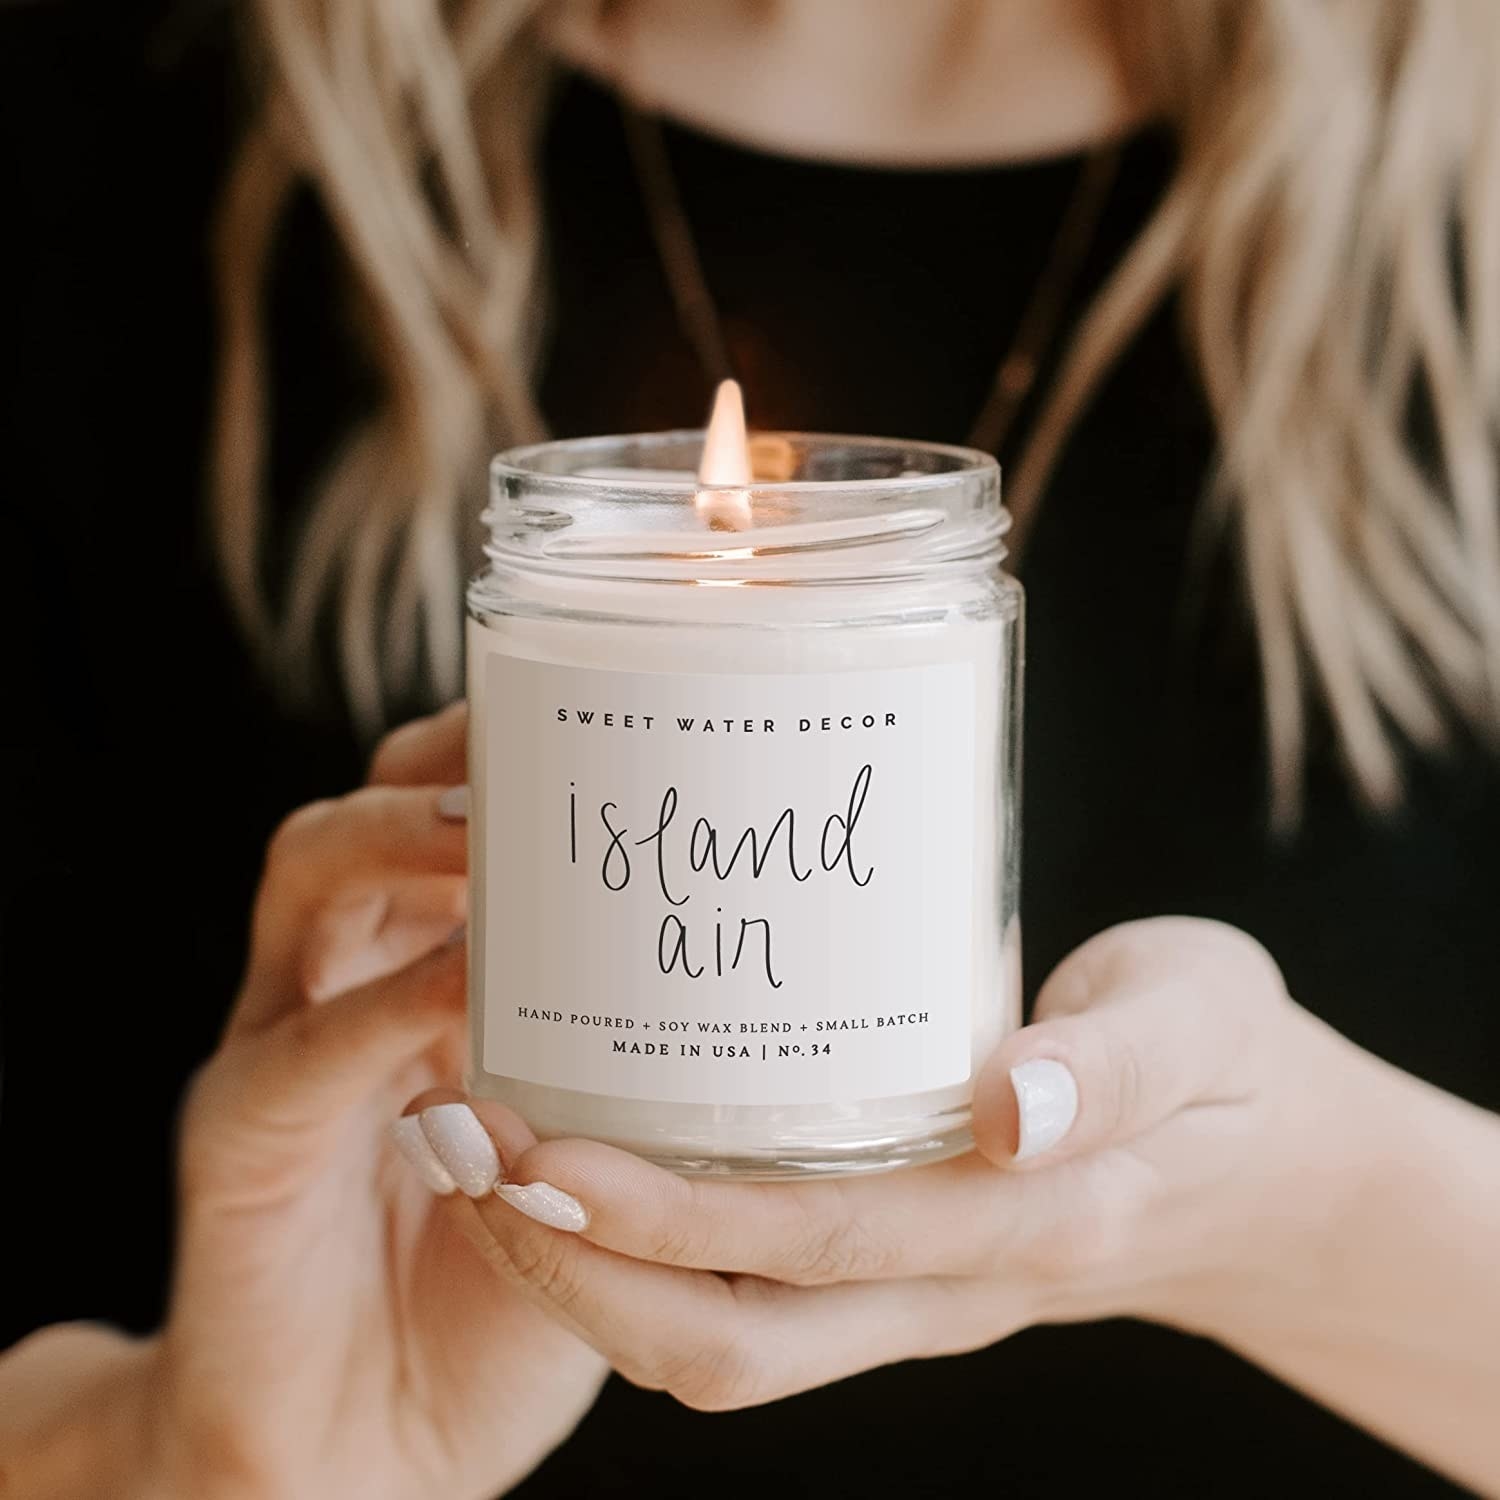 A person holds a candle that says &#x27;Island air&#x27;